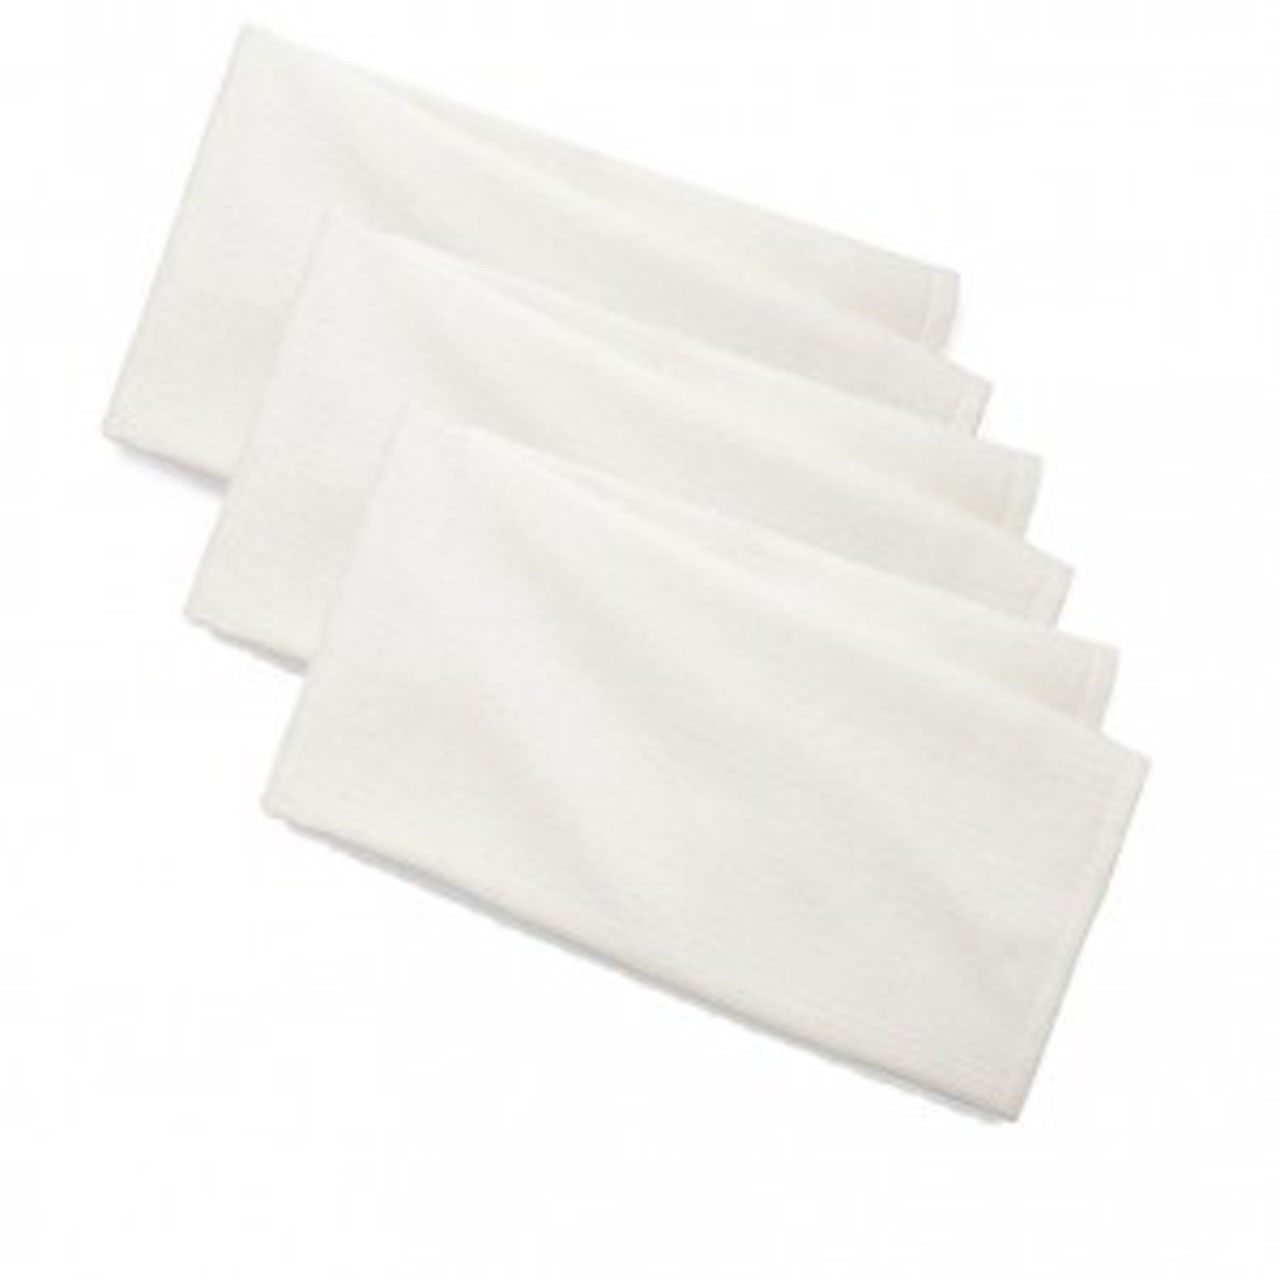 What are the ideal uses for White Huck Towels?